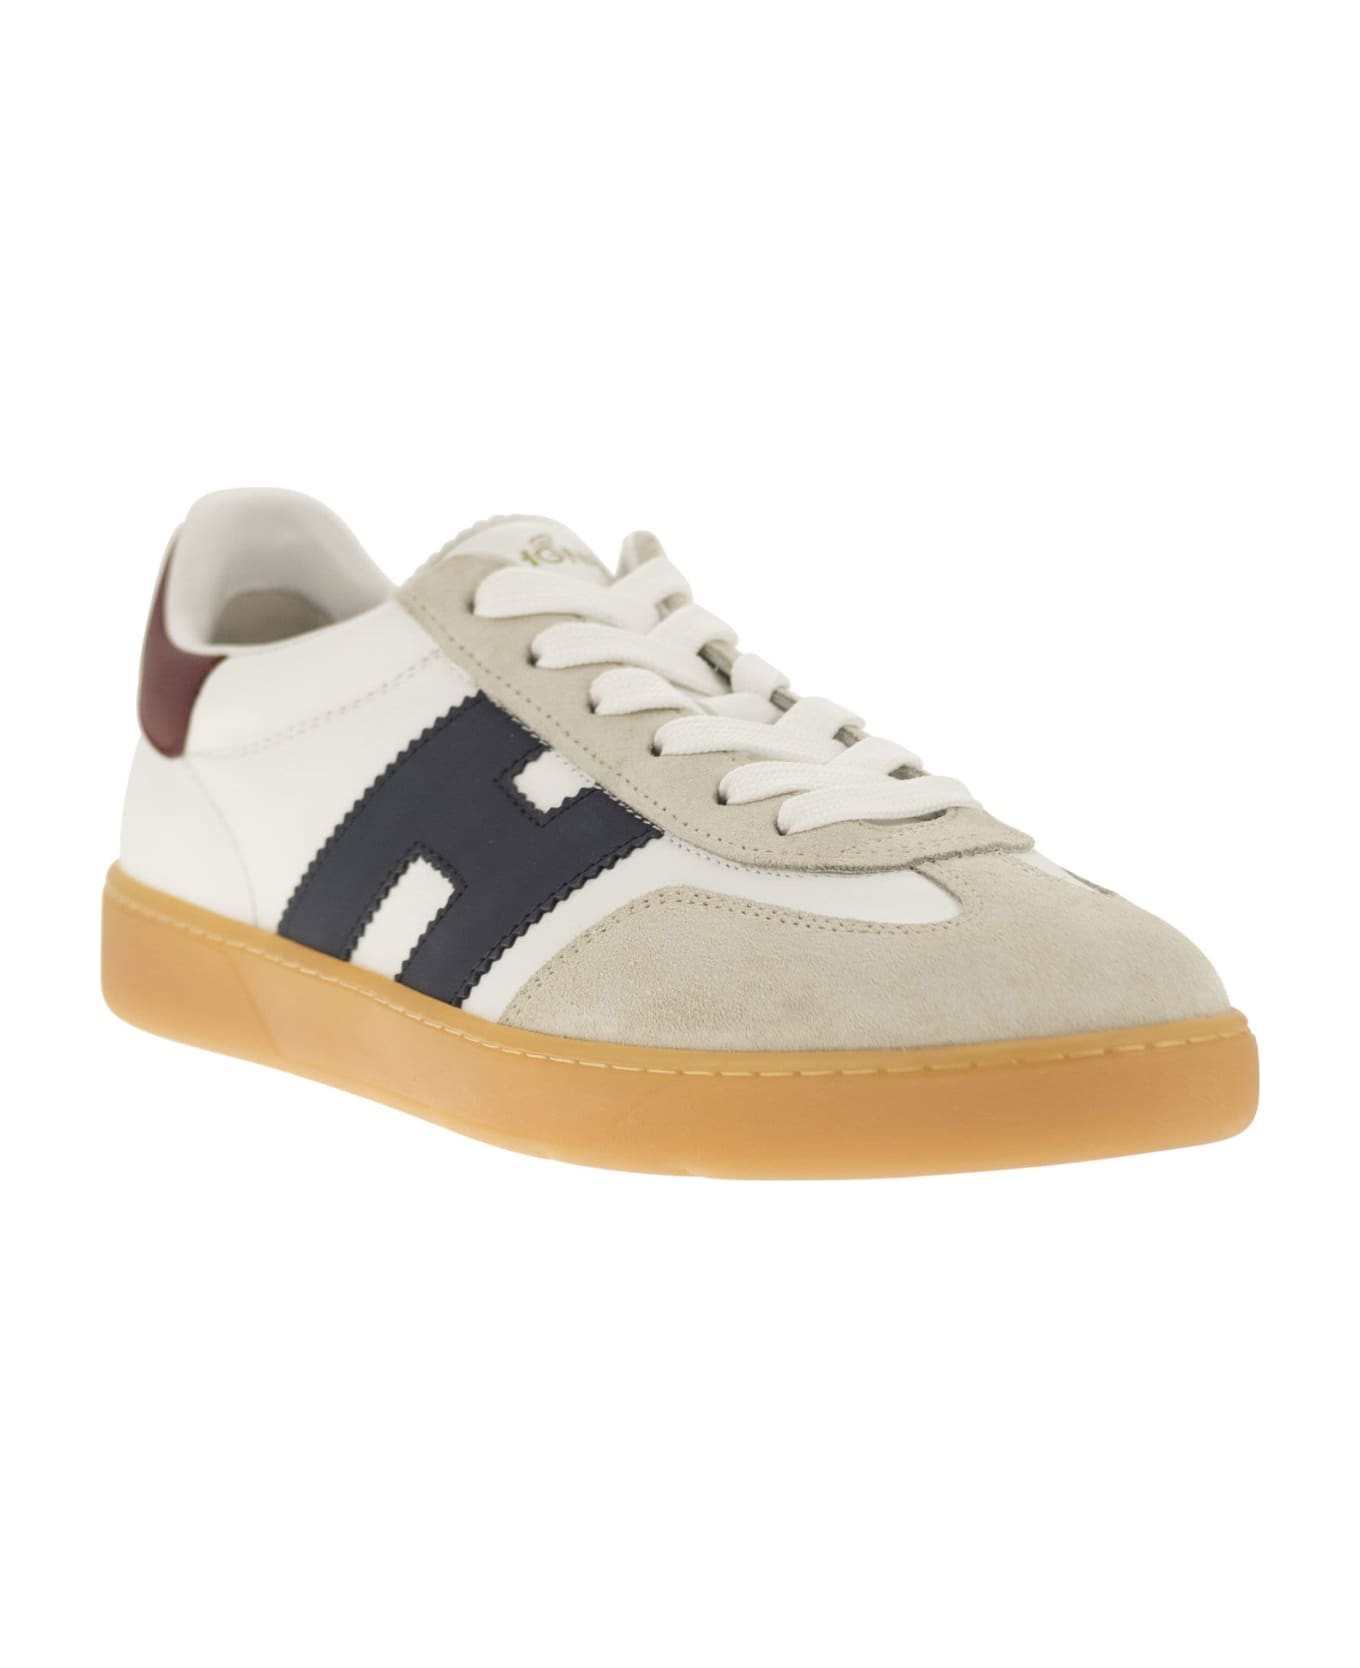 Hogan Cool Sneakers In Leather And Suede - White スニーカー